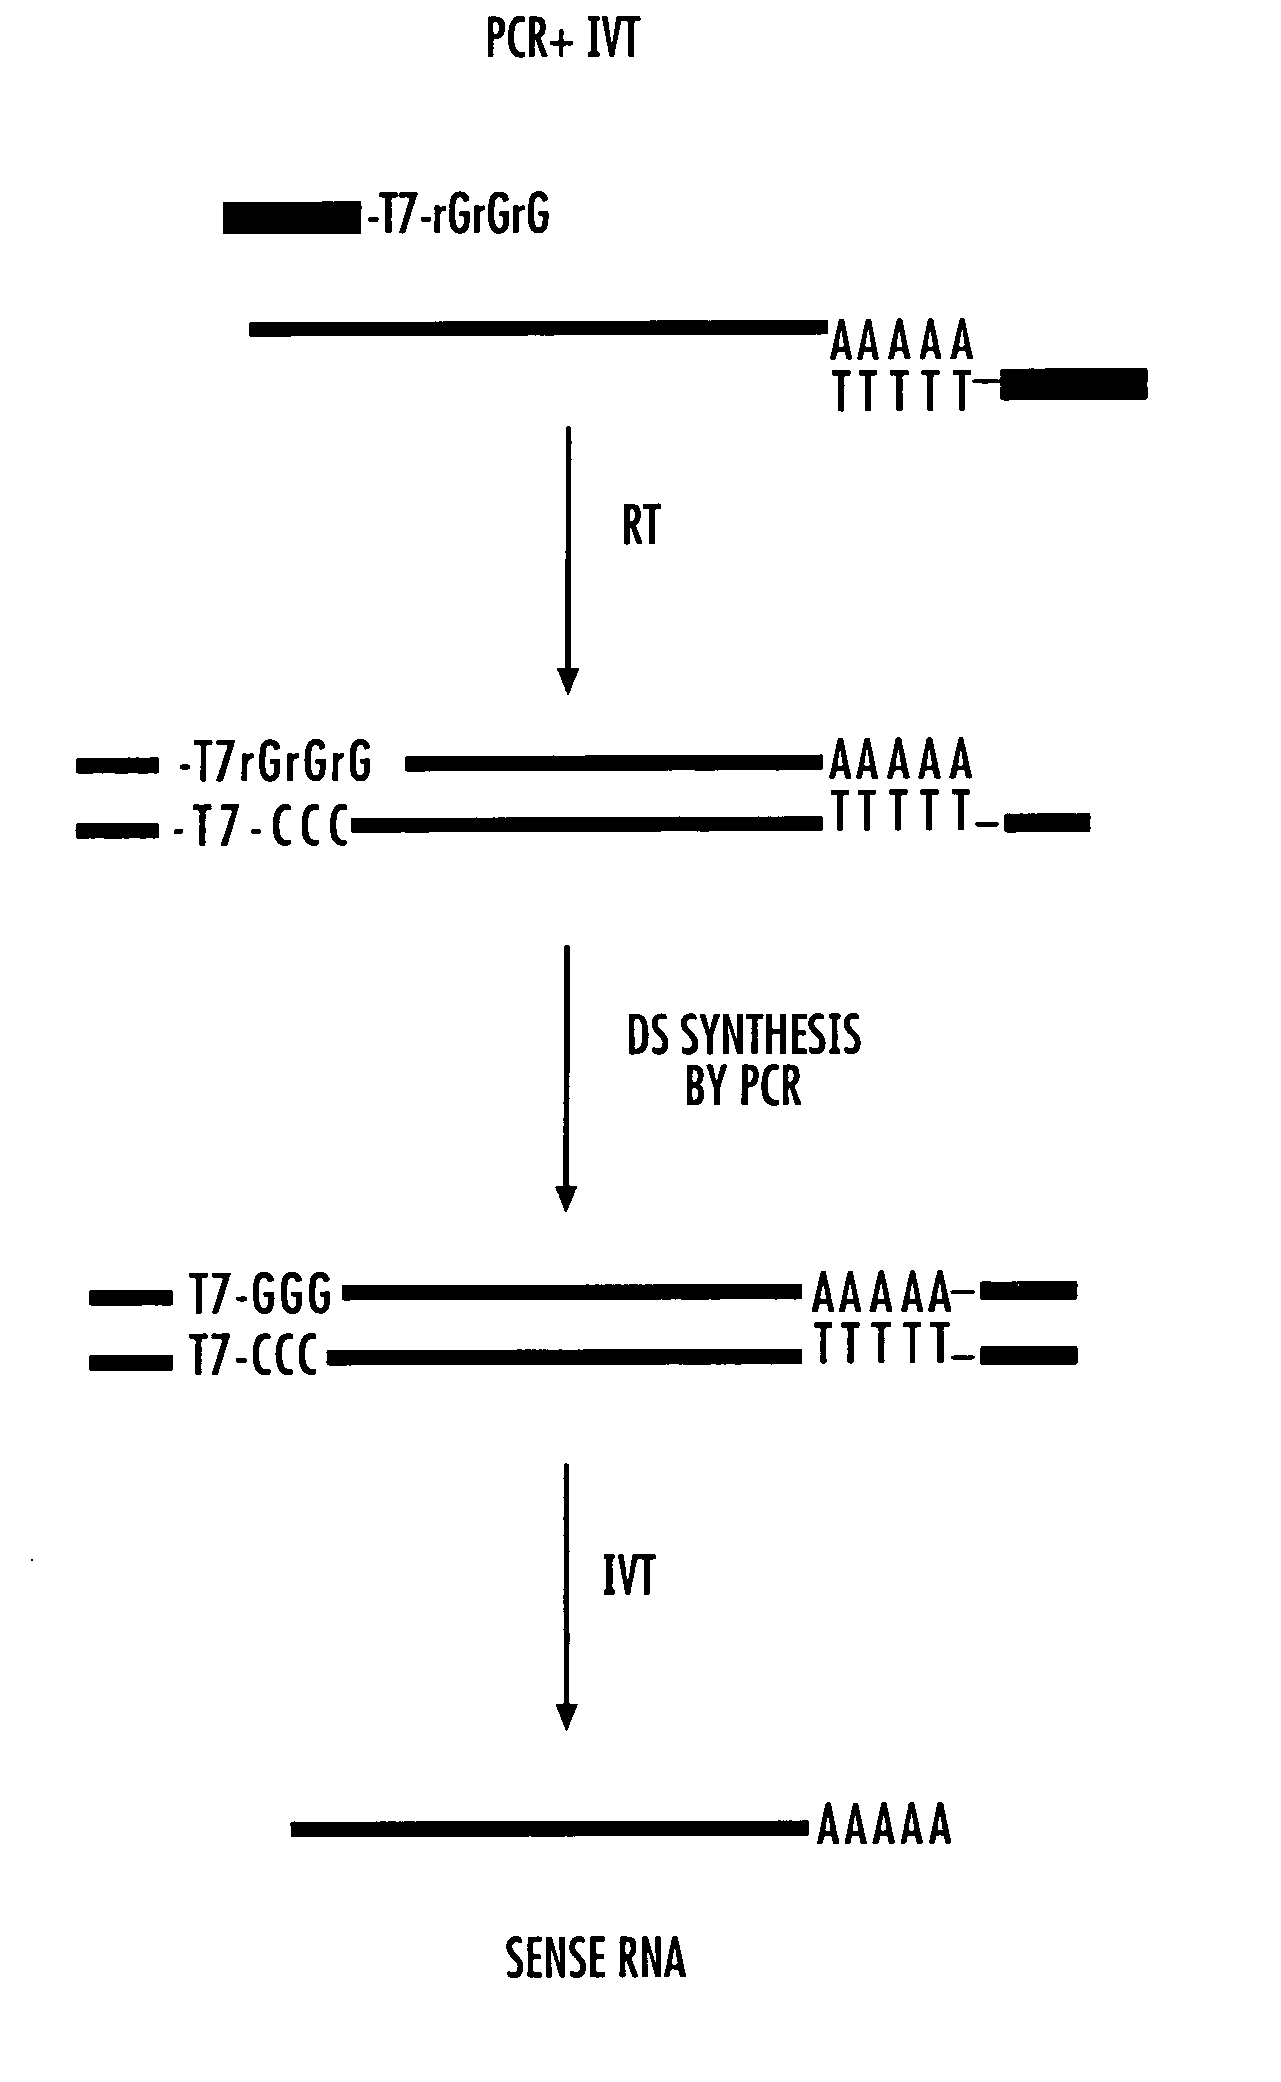 Low cycle amplification of RNA molecules